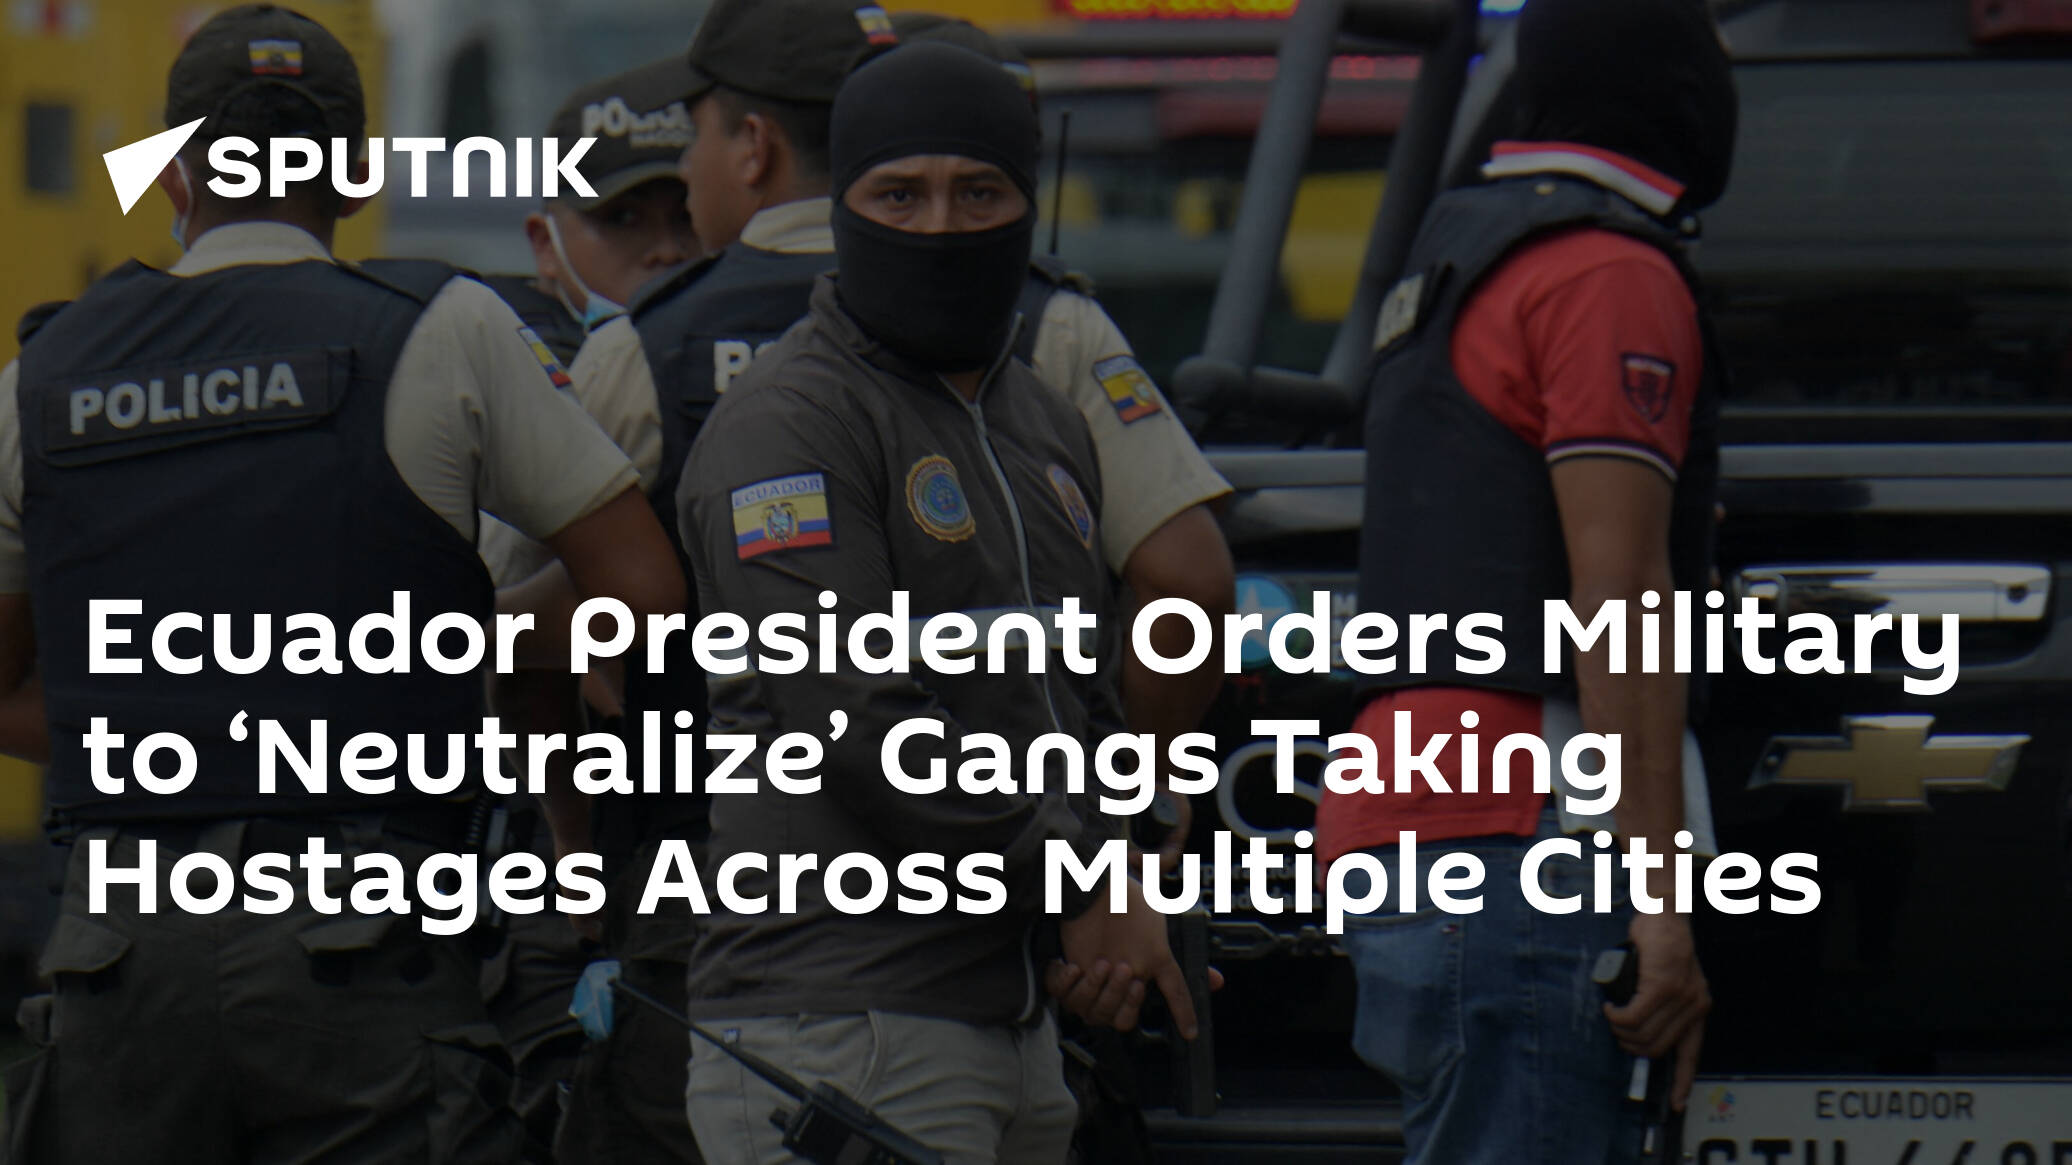 Ecuador President Orders Military to ‘Neutralize’ Gangs Taking Hostages Across Multiple Cities